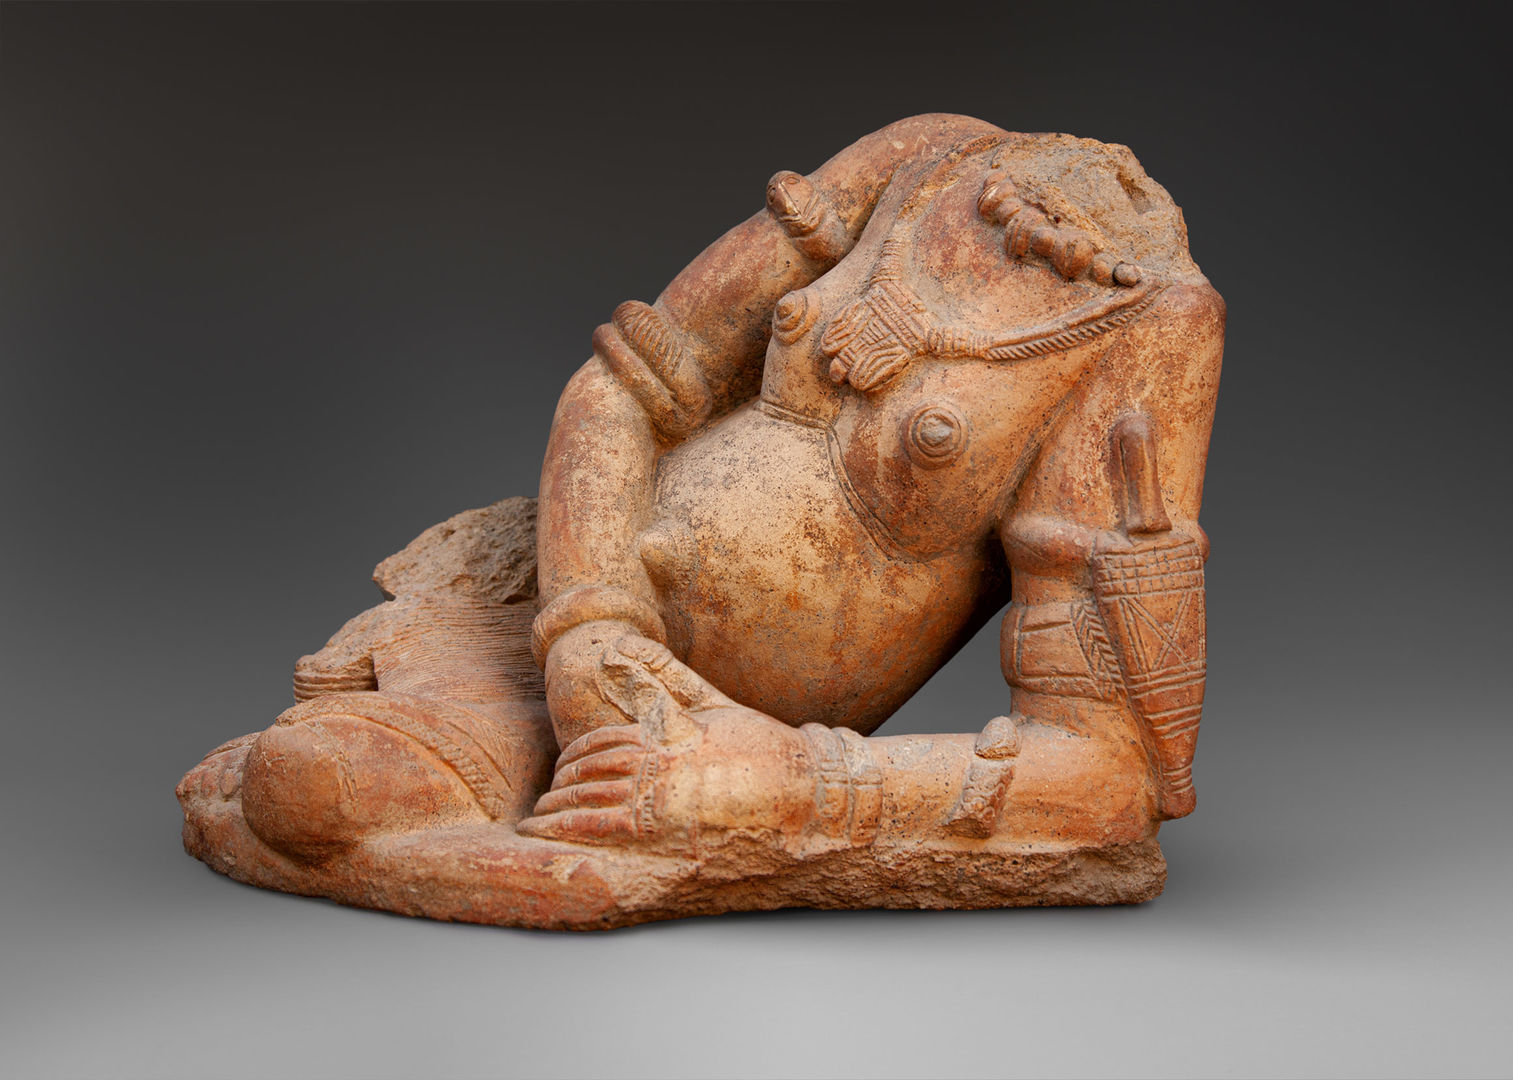 A terracotta figurine of a reclining nude woman